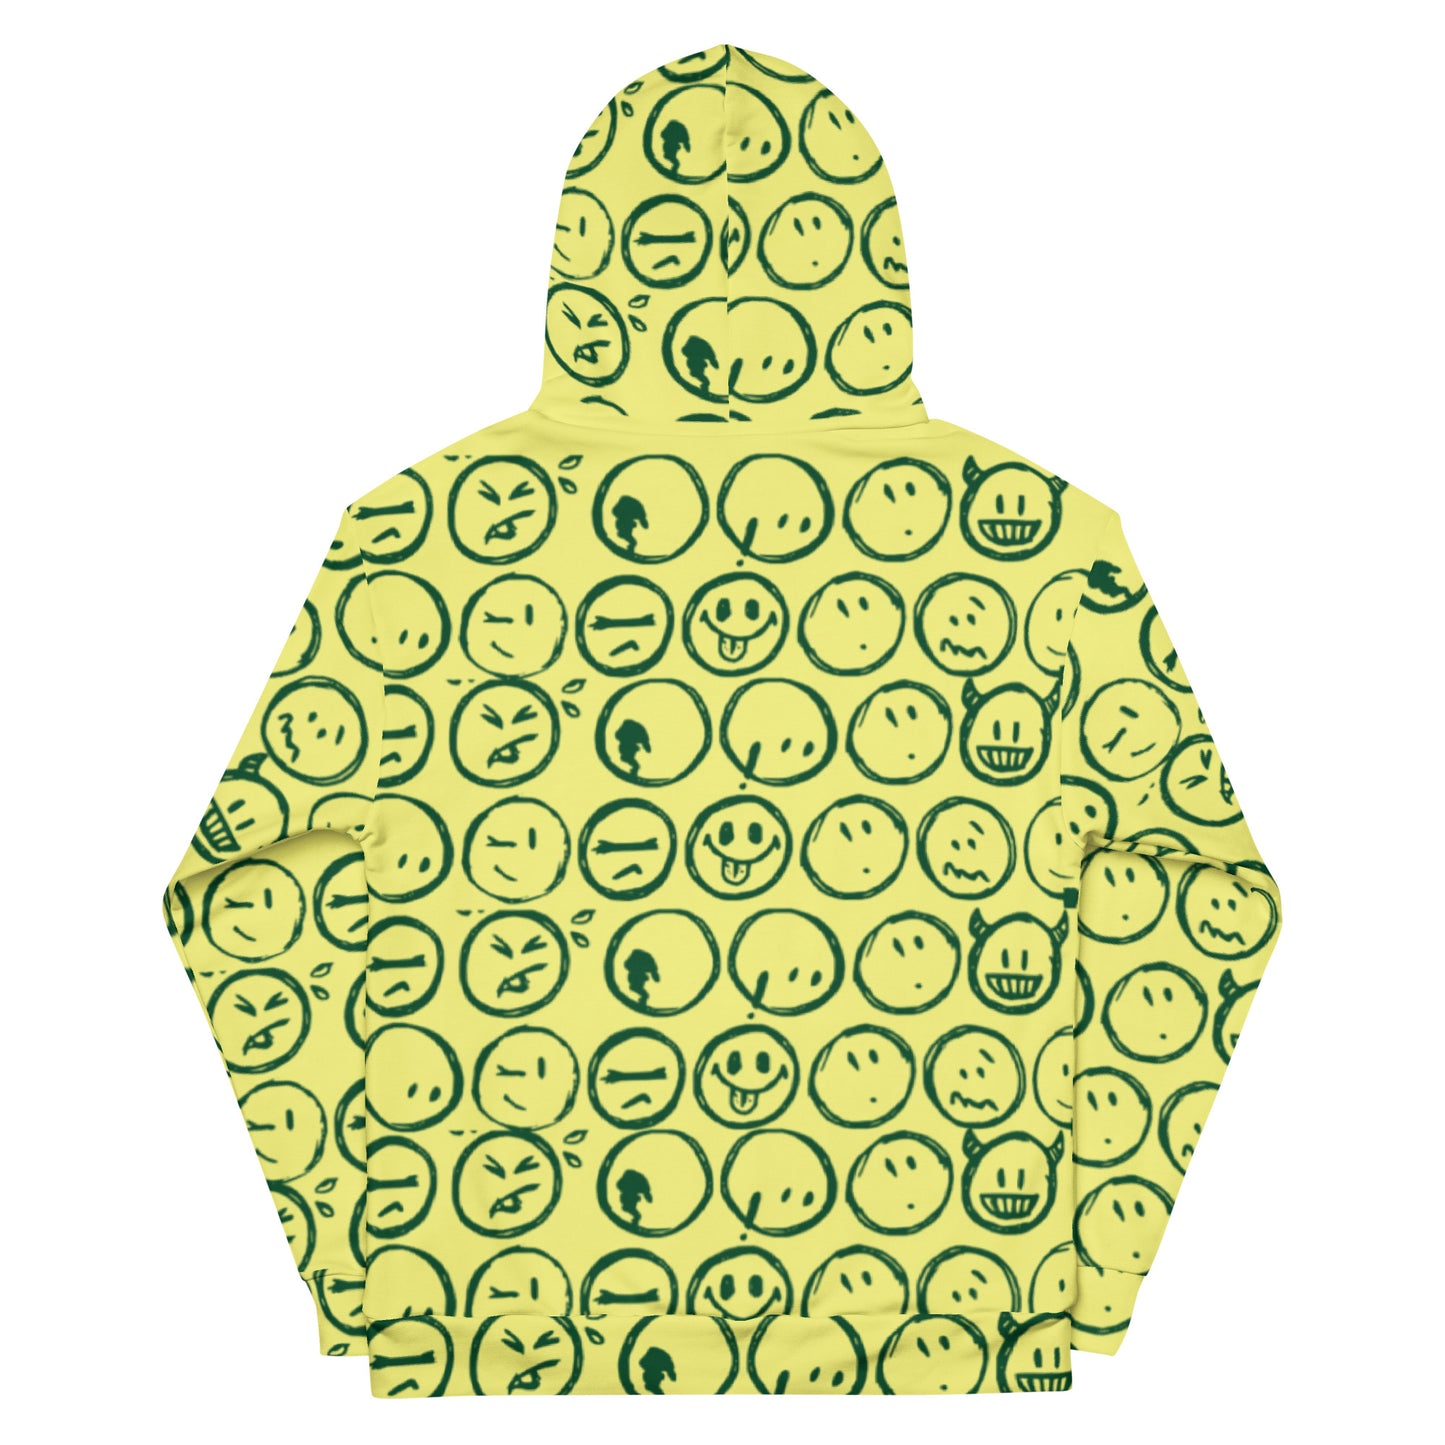 Cur-moji (Forest Green / Yellow ) Unisex Hoodie